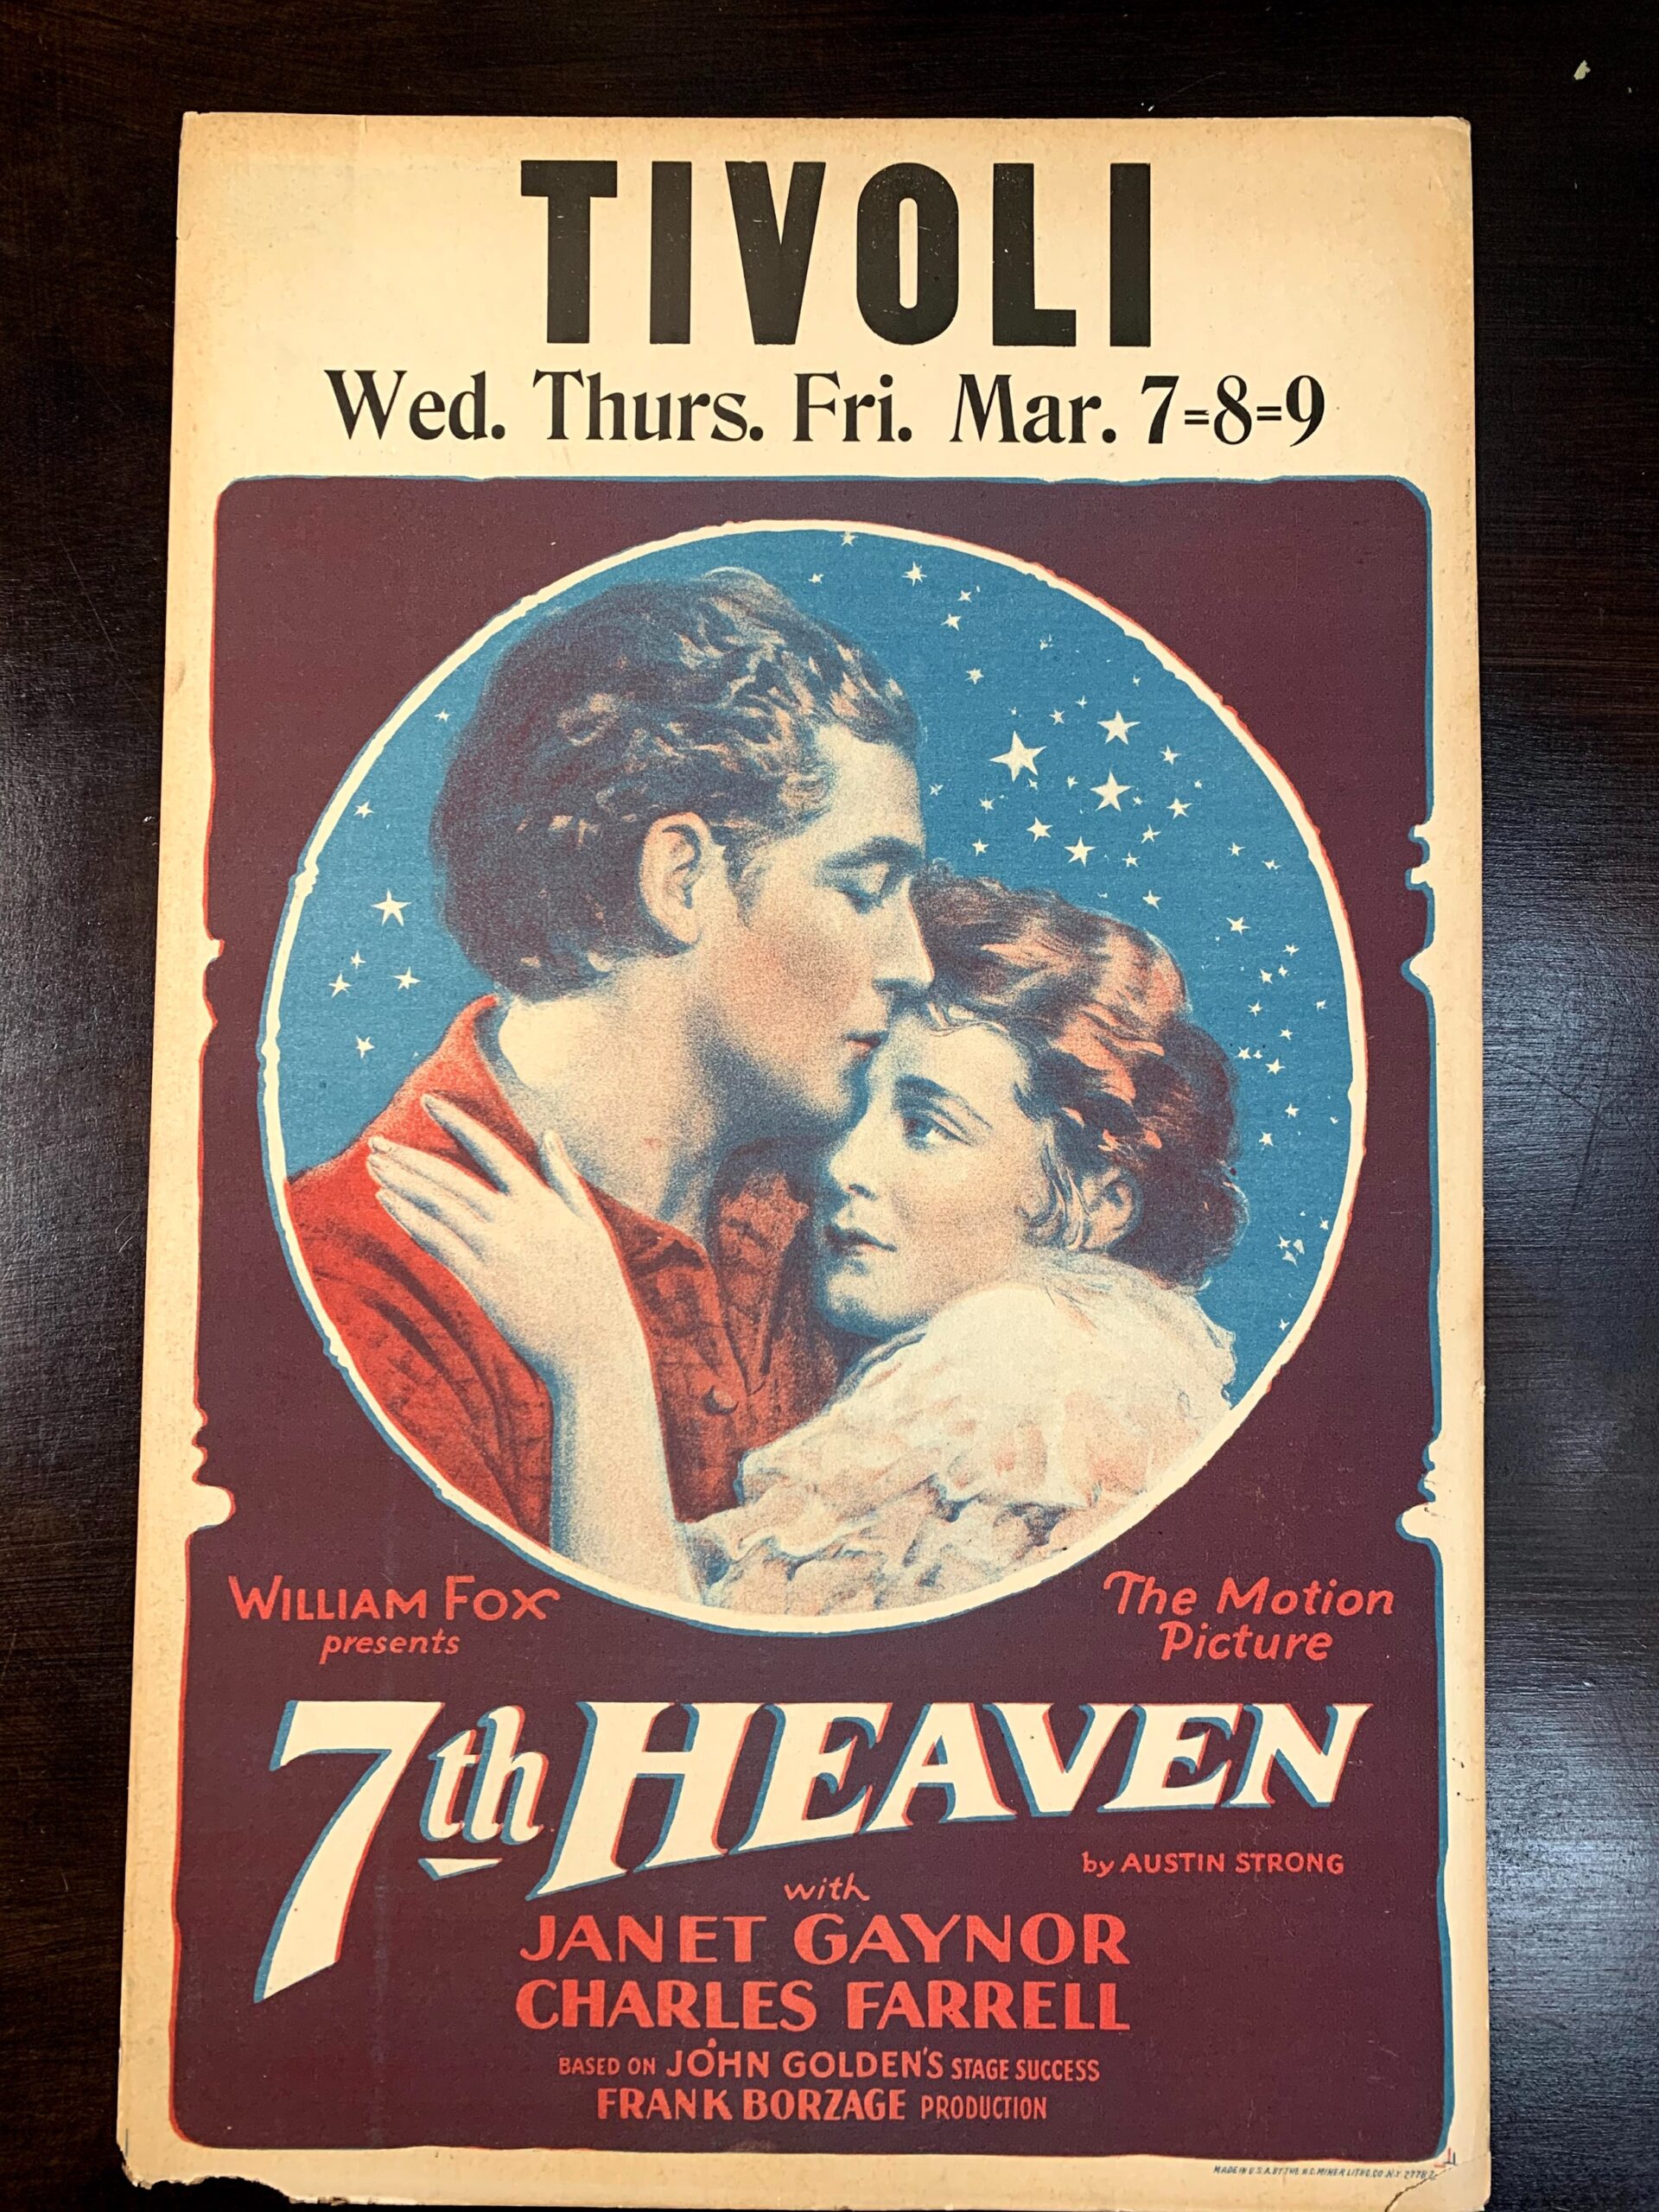 7th Heaven - Janet Gaynor (1927) US Window Card Movie Poster